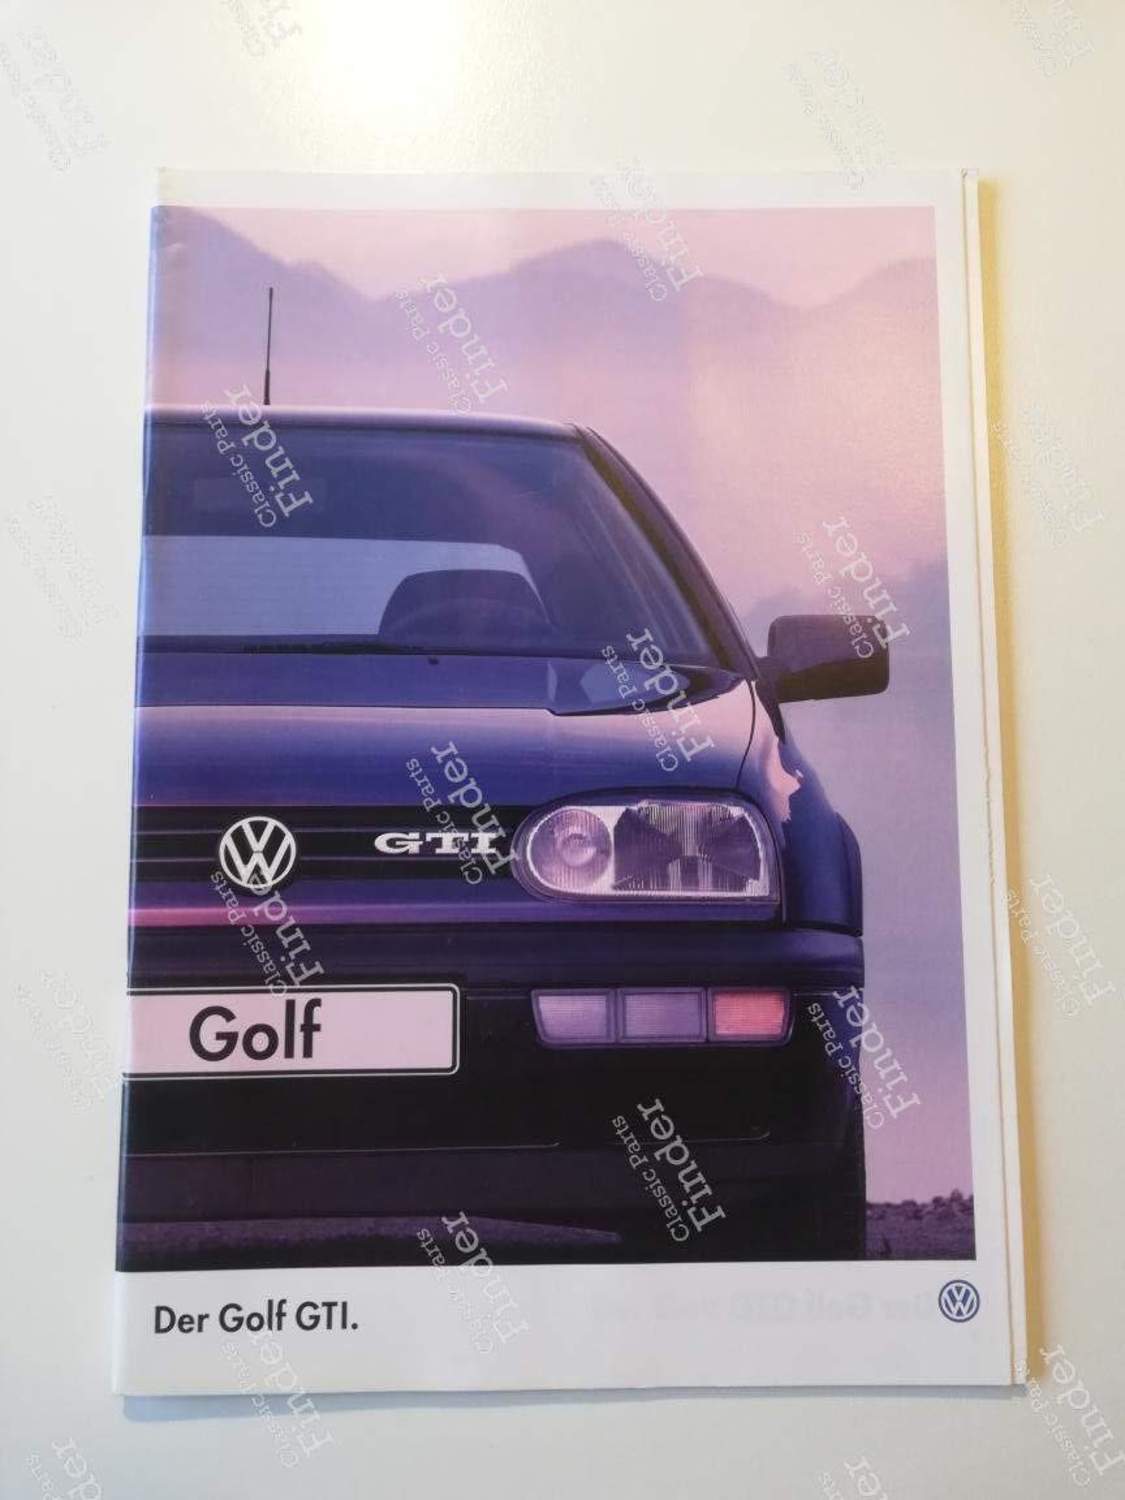 Volkswagen Golf MK3 VR6, Comments are welcome :)